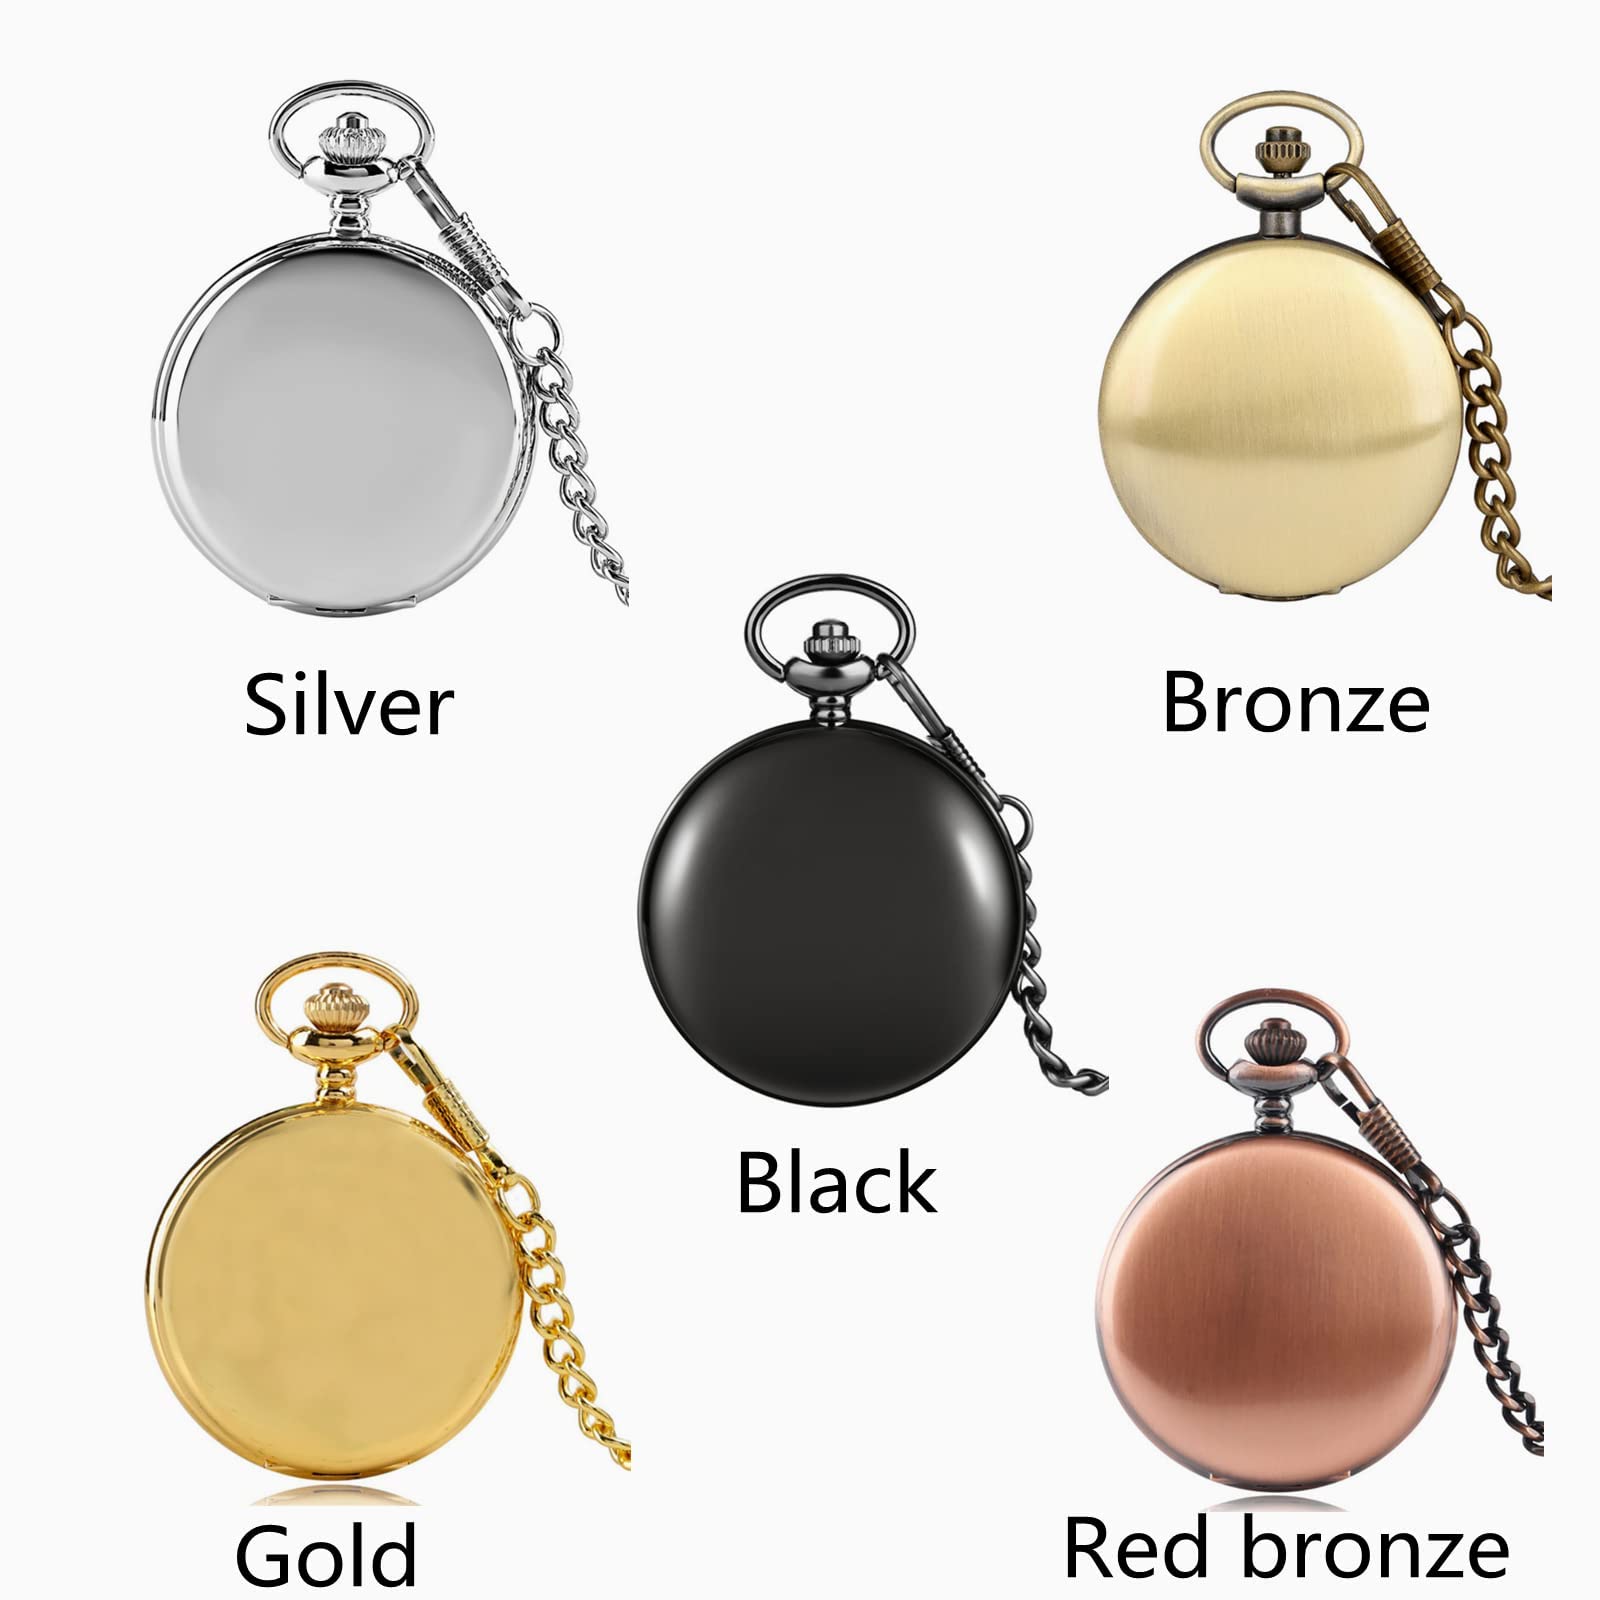 Personalized Pocket Watches with Photo and Text Quartz Vintage Pocket Watch with Chain for Men Women Birthday/Marry/Memorial Gift